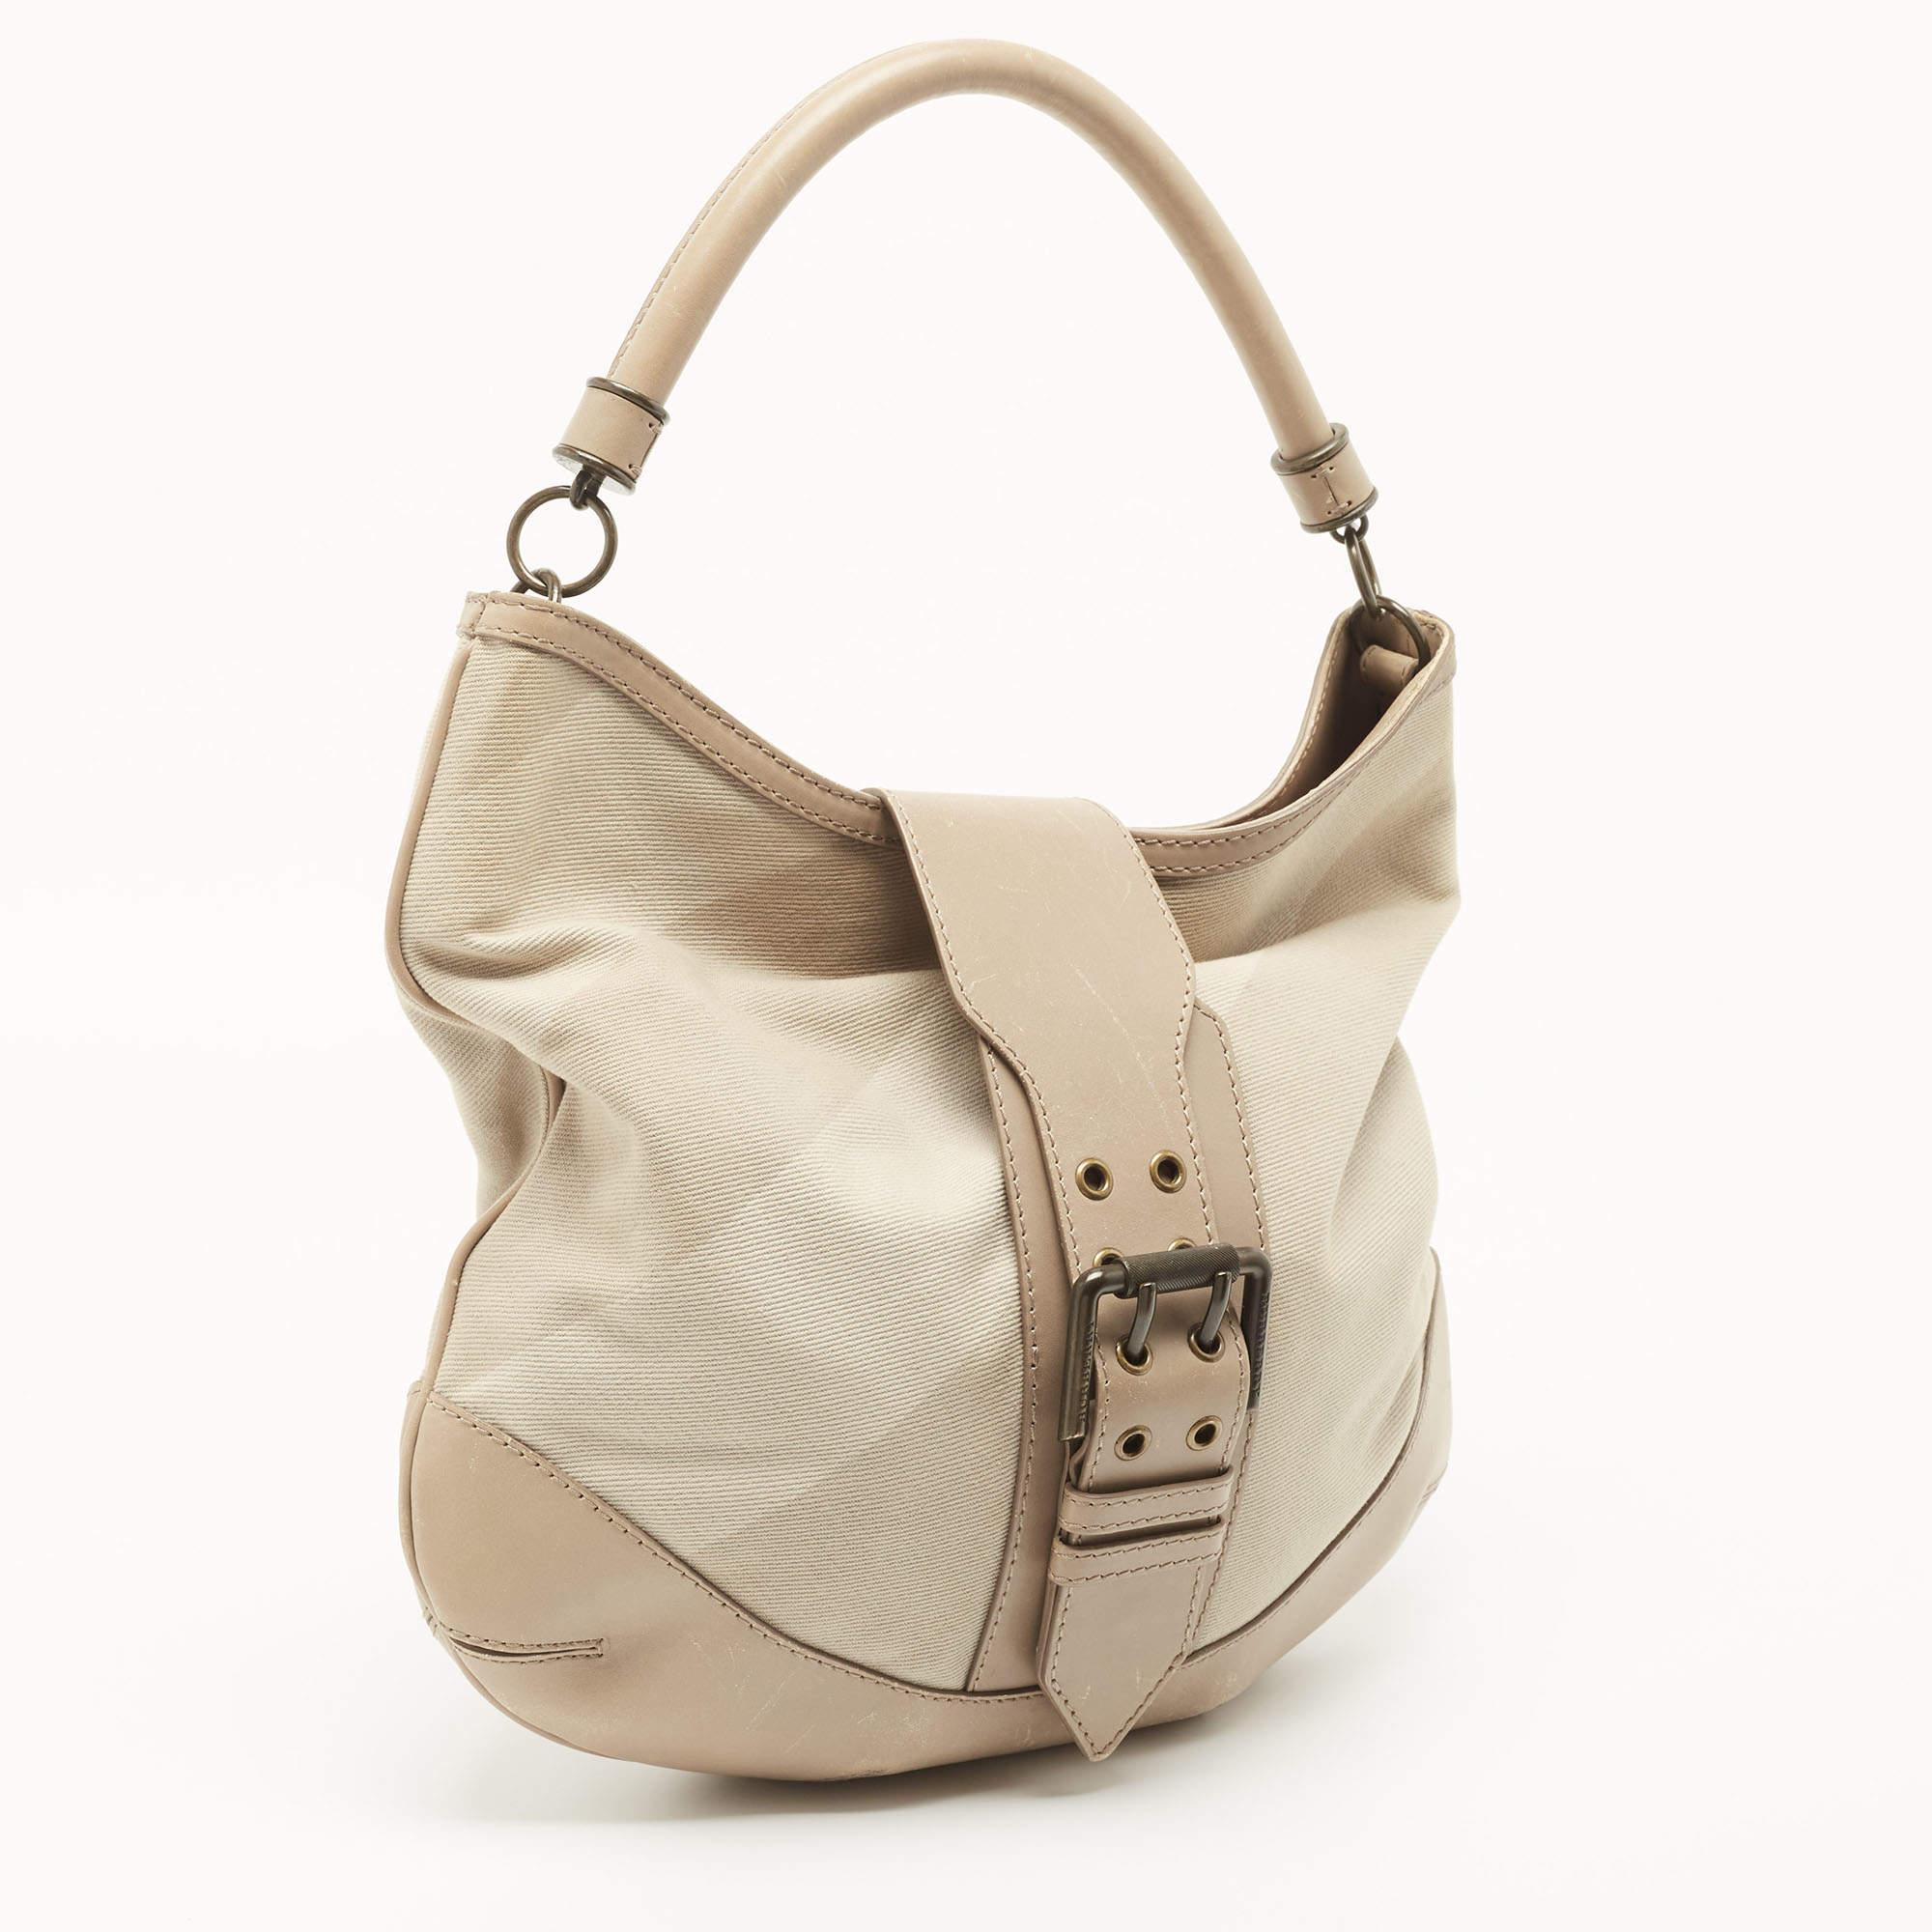 This Burberry hobo is an example of the brand's fine designs that are skillfully crafted to project a classic charm. It is a functional creation with an elevating appeal.

